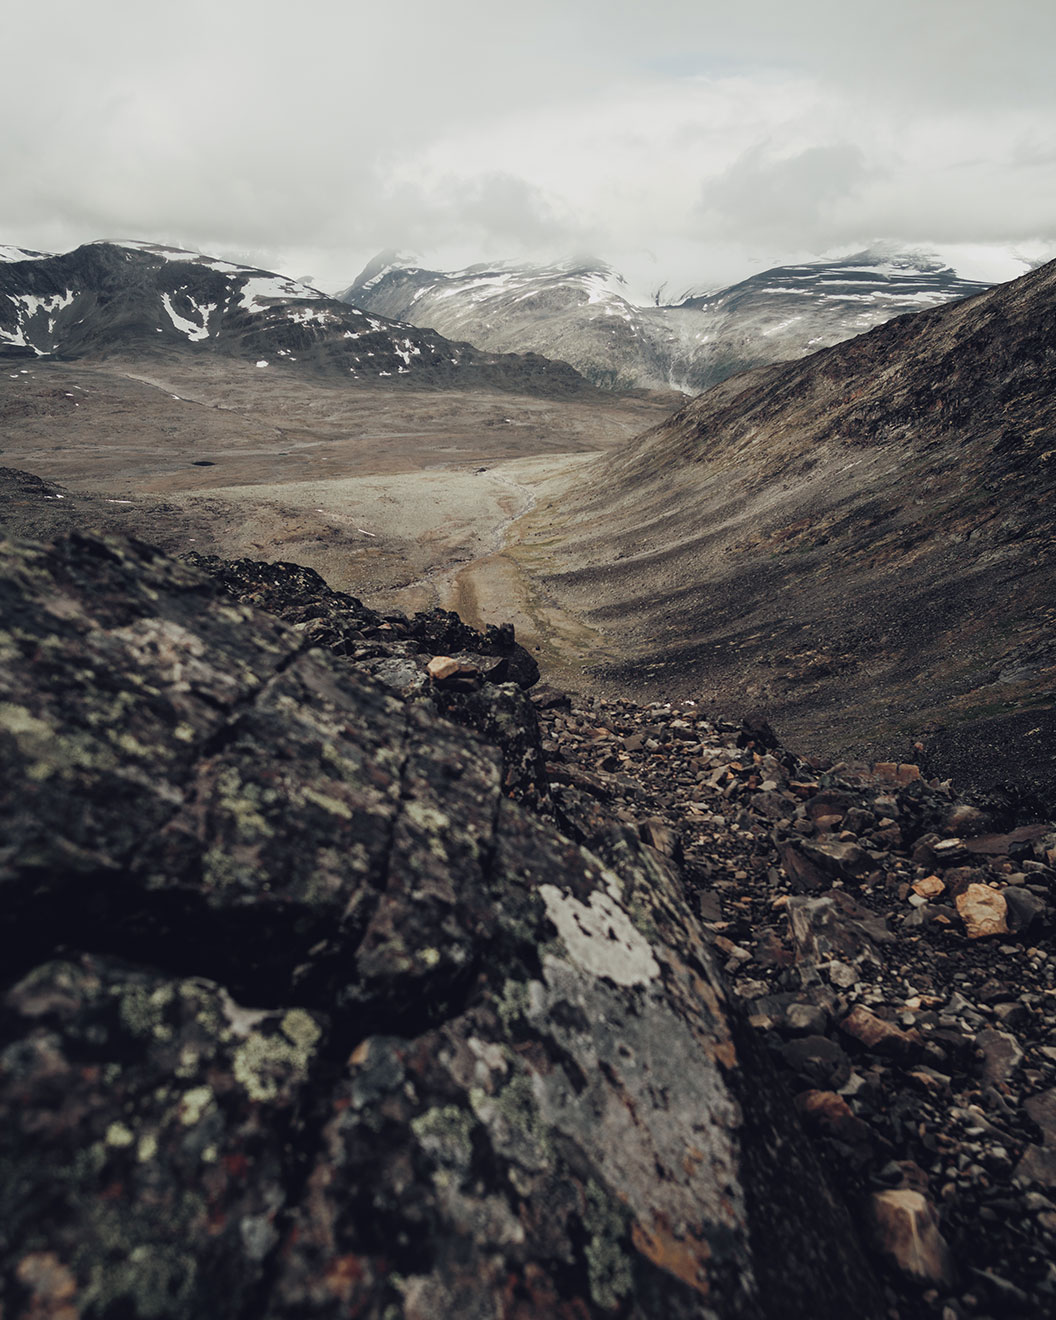 Hiking in Norway: the rocky mountains of the Jotunheimen national park